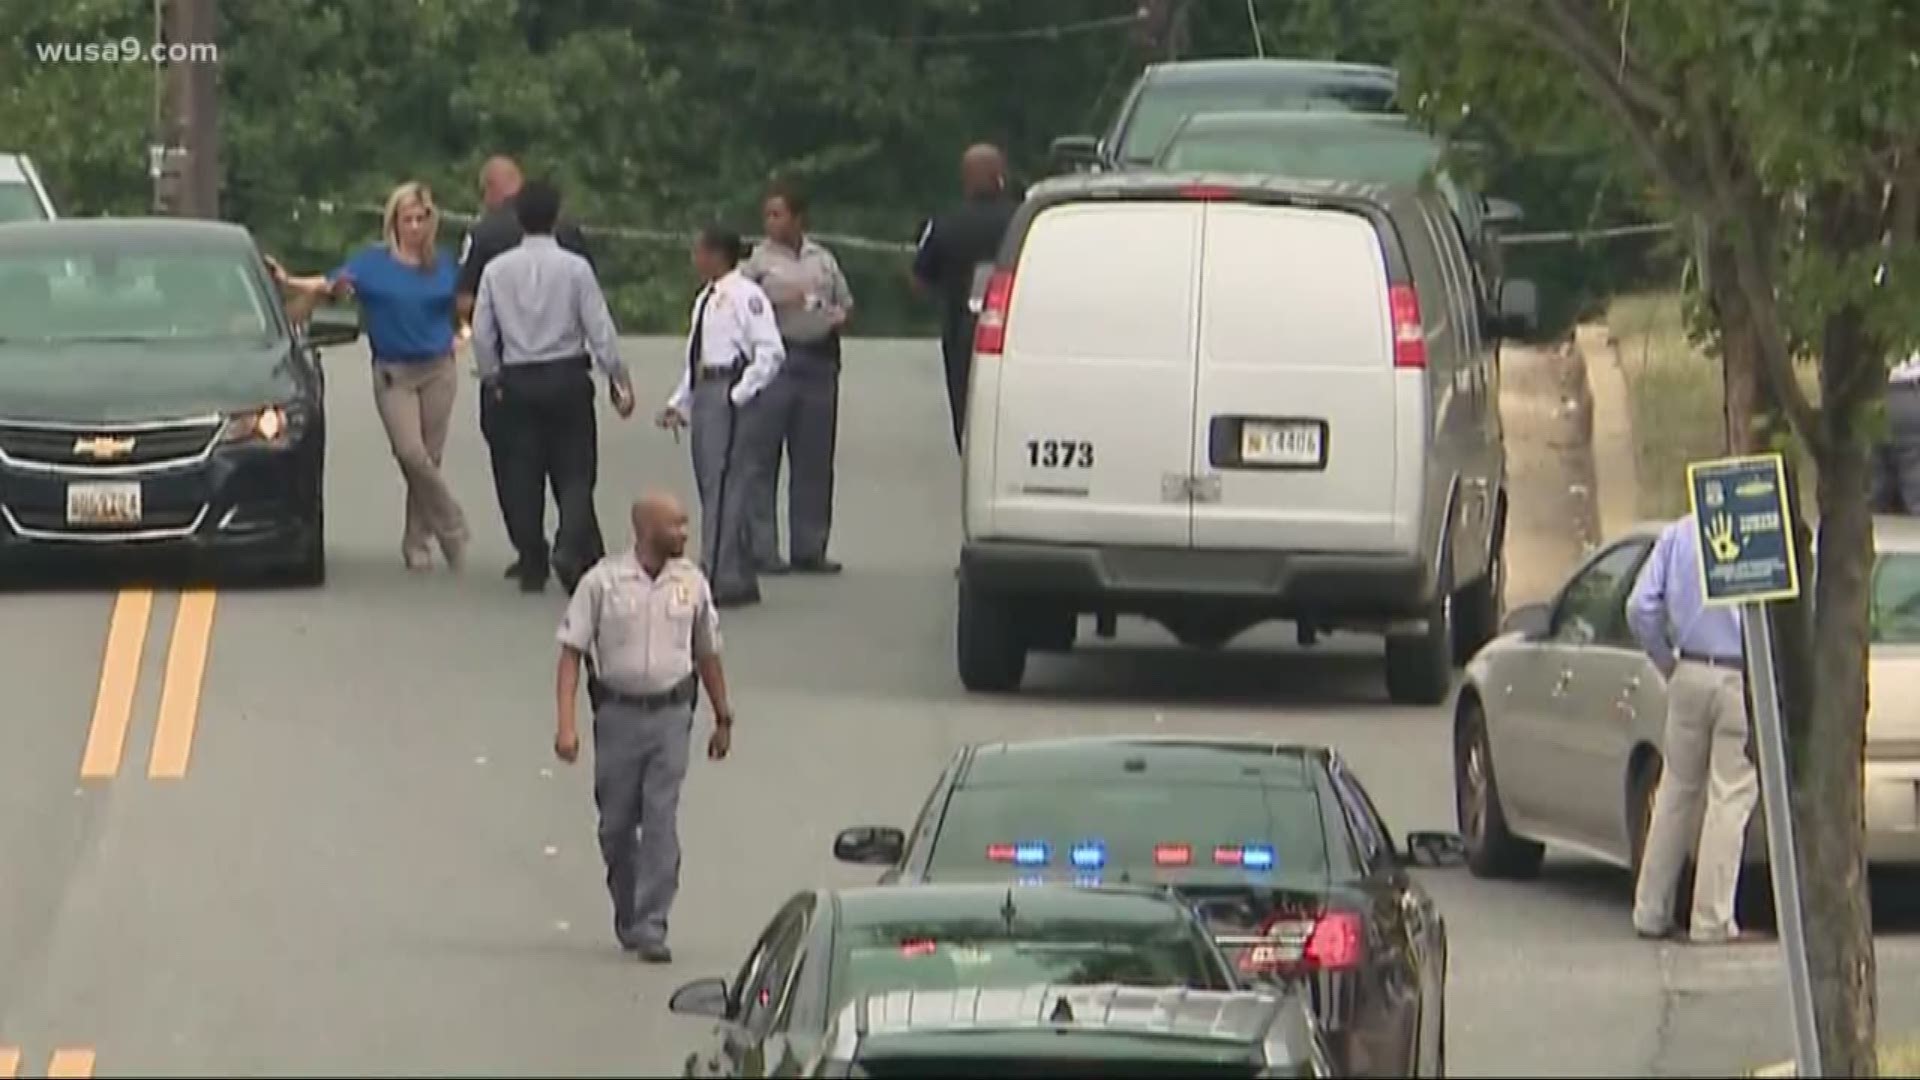 Police say a large group of people were fighting in Suitland after a funeral for a homicide victim. 
As officers responded -- they heard gun shots down the street. That's where they found the man in a car with serious injuries.